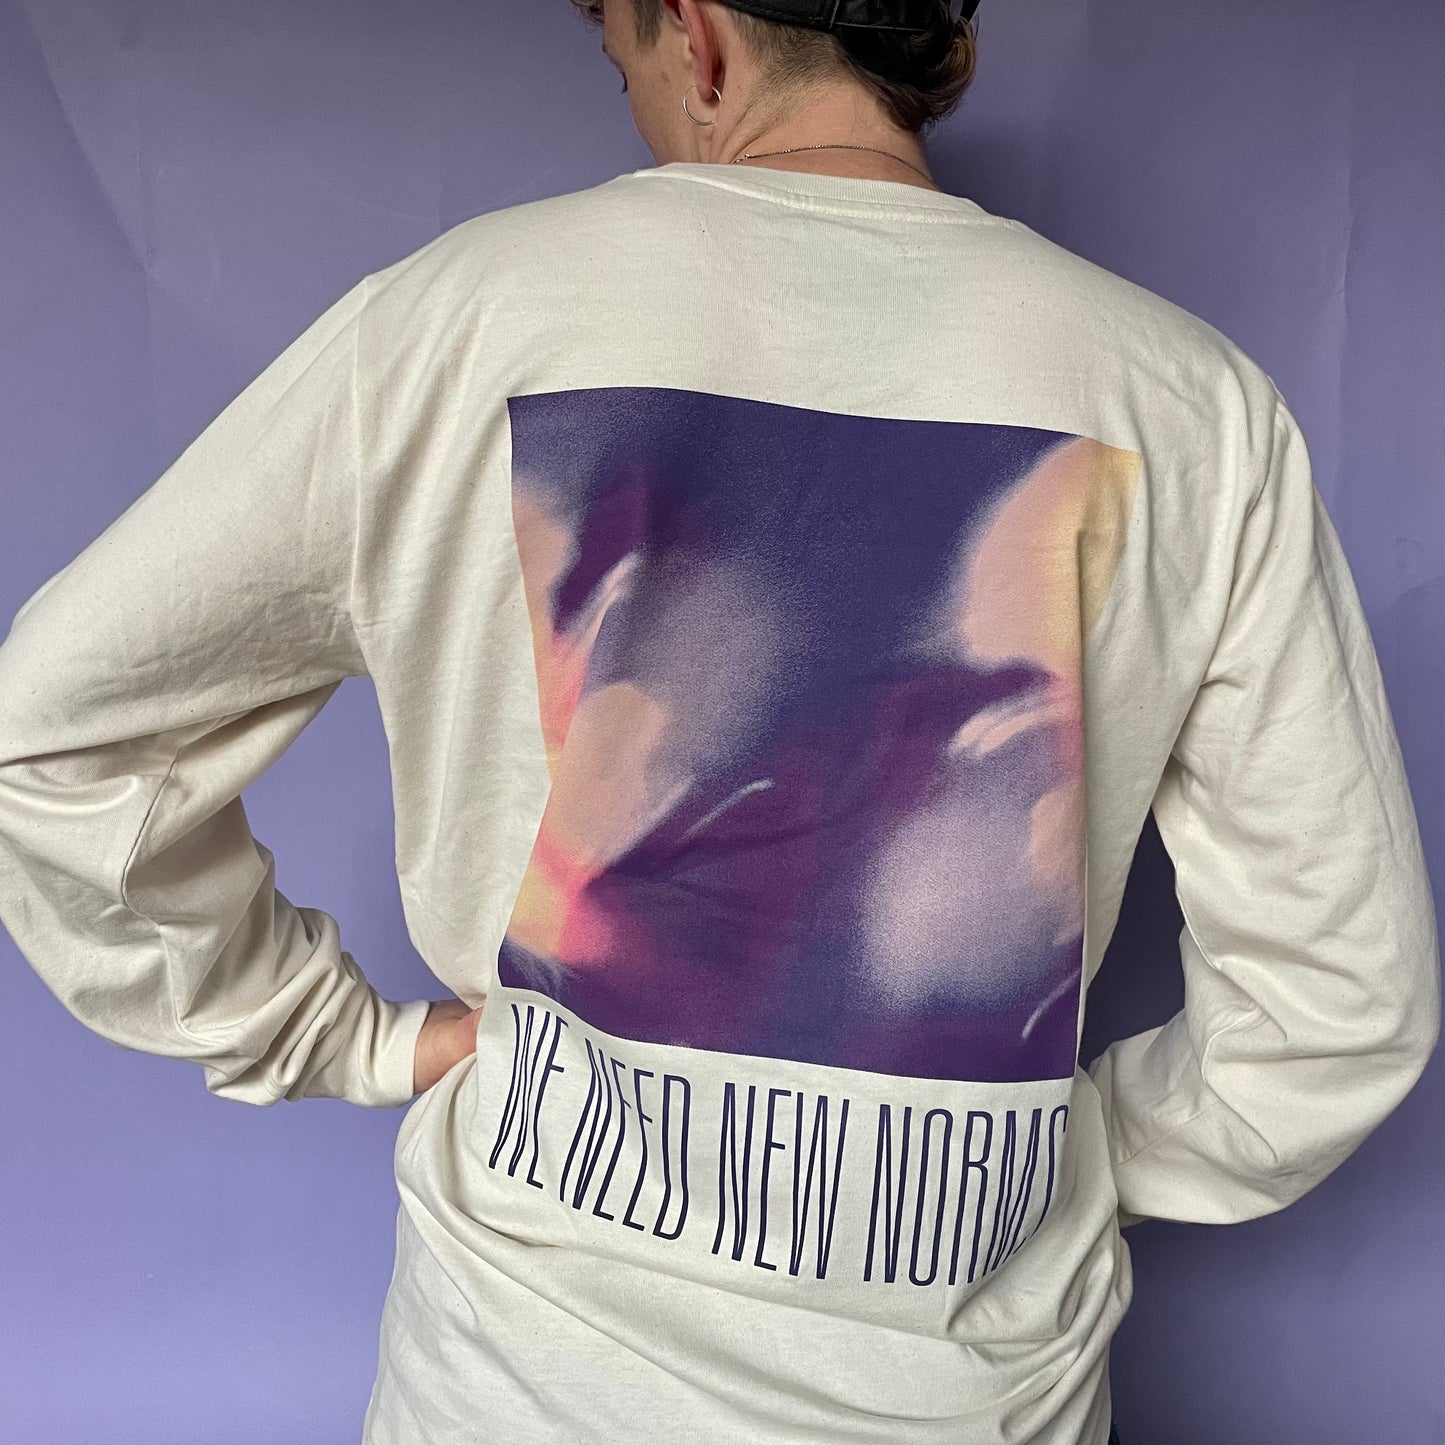 "We Need New Norms" Longsleeve